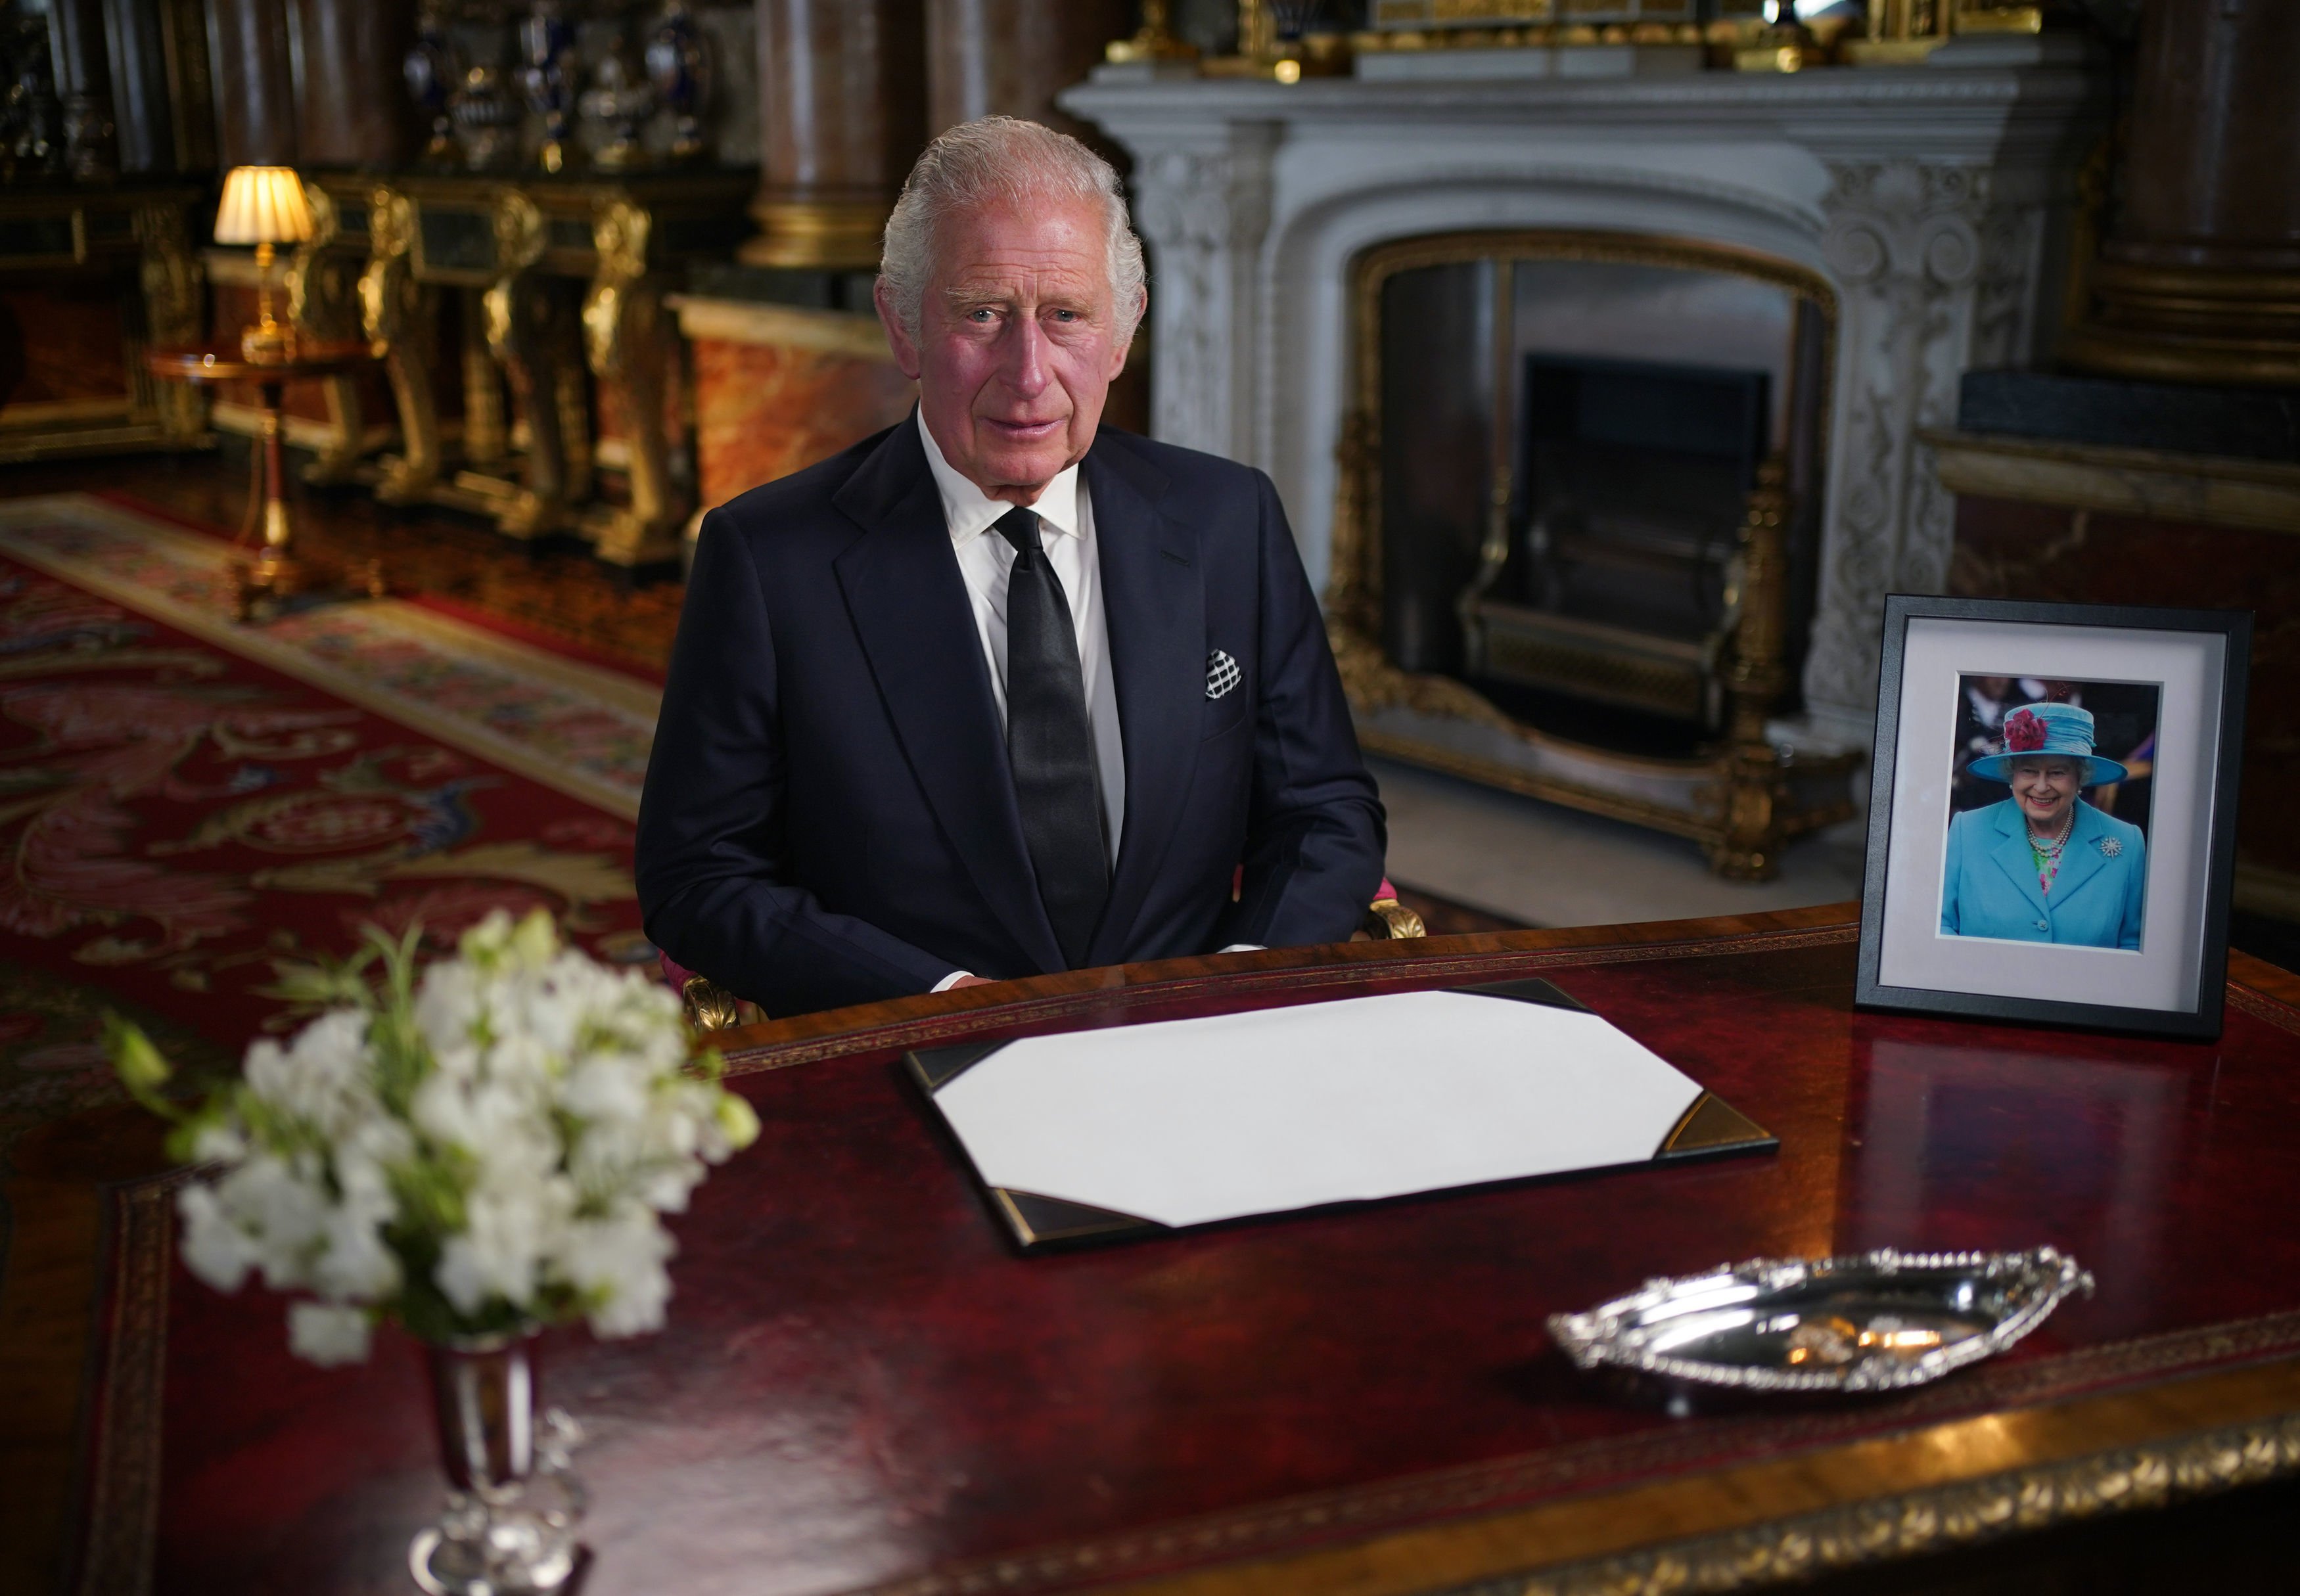 King Charles III delivers his address to the nation and the Commonwealth from Buckingham Palace following the death of Queen Elizabeth II, September 9, 2022 in London, England | Source: Getty Images